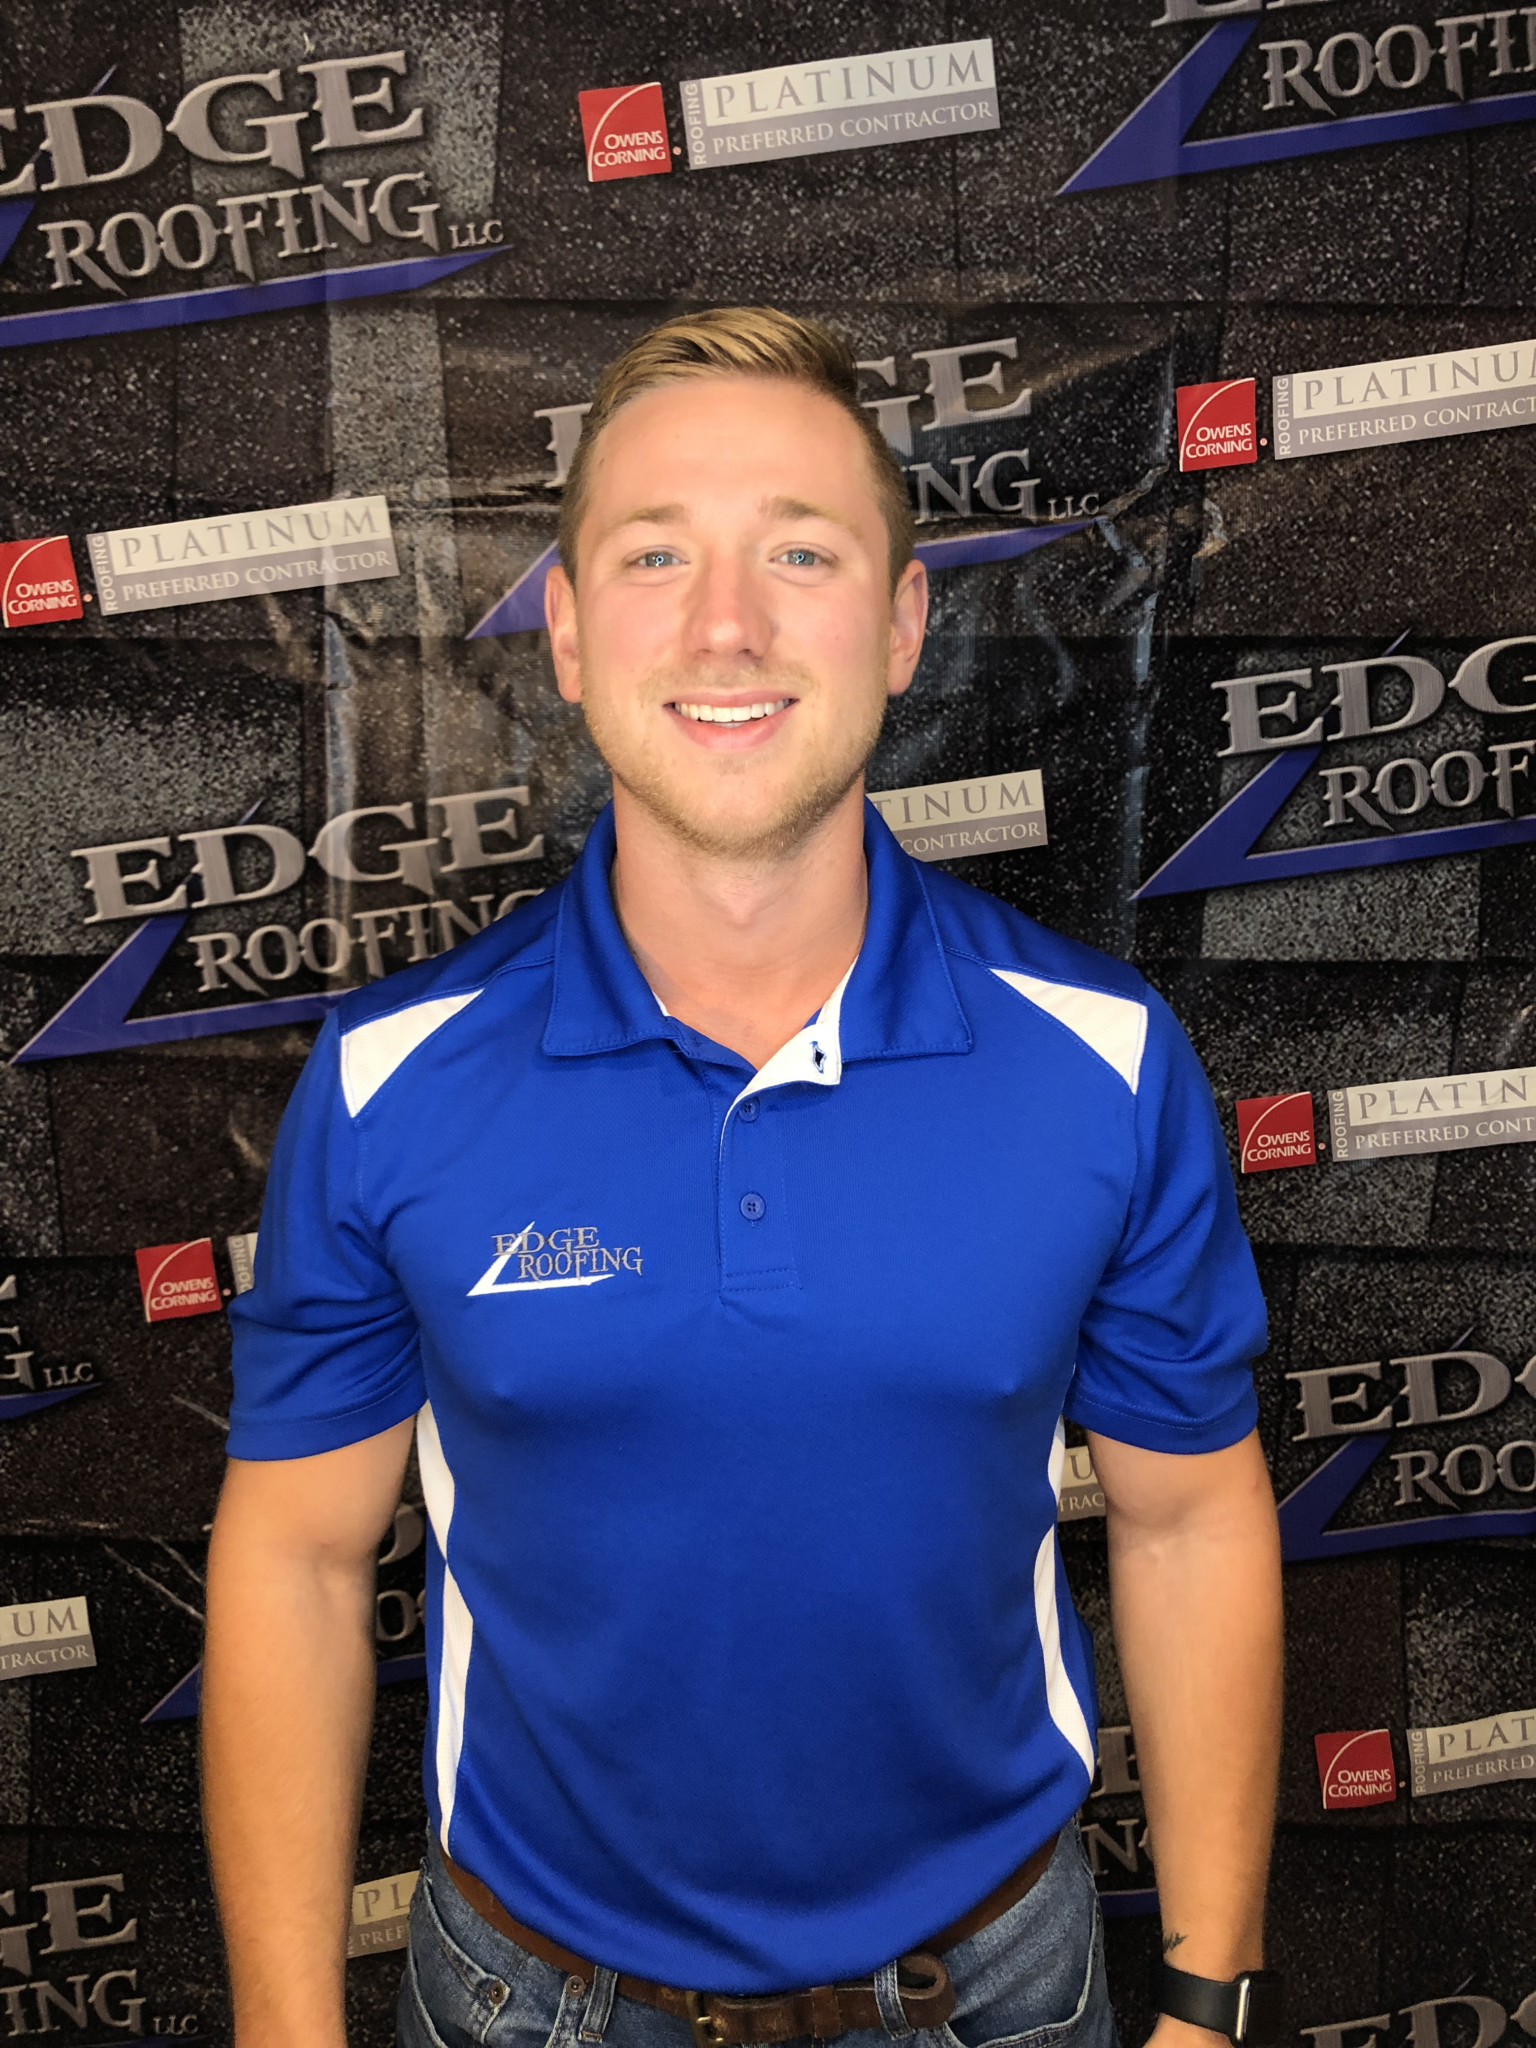 About Edge Roofing Llc